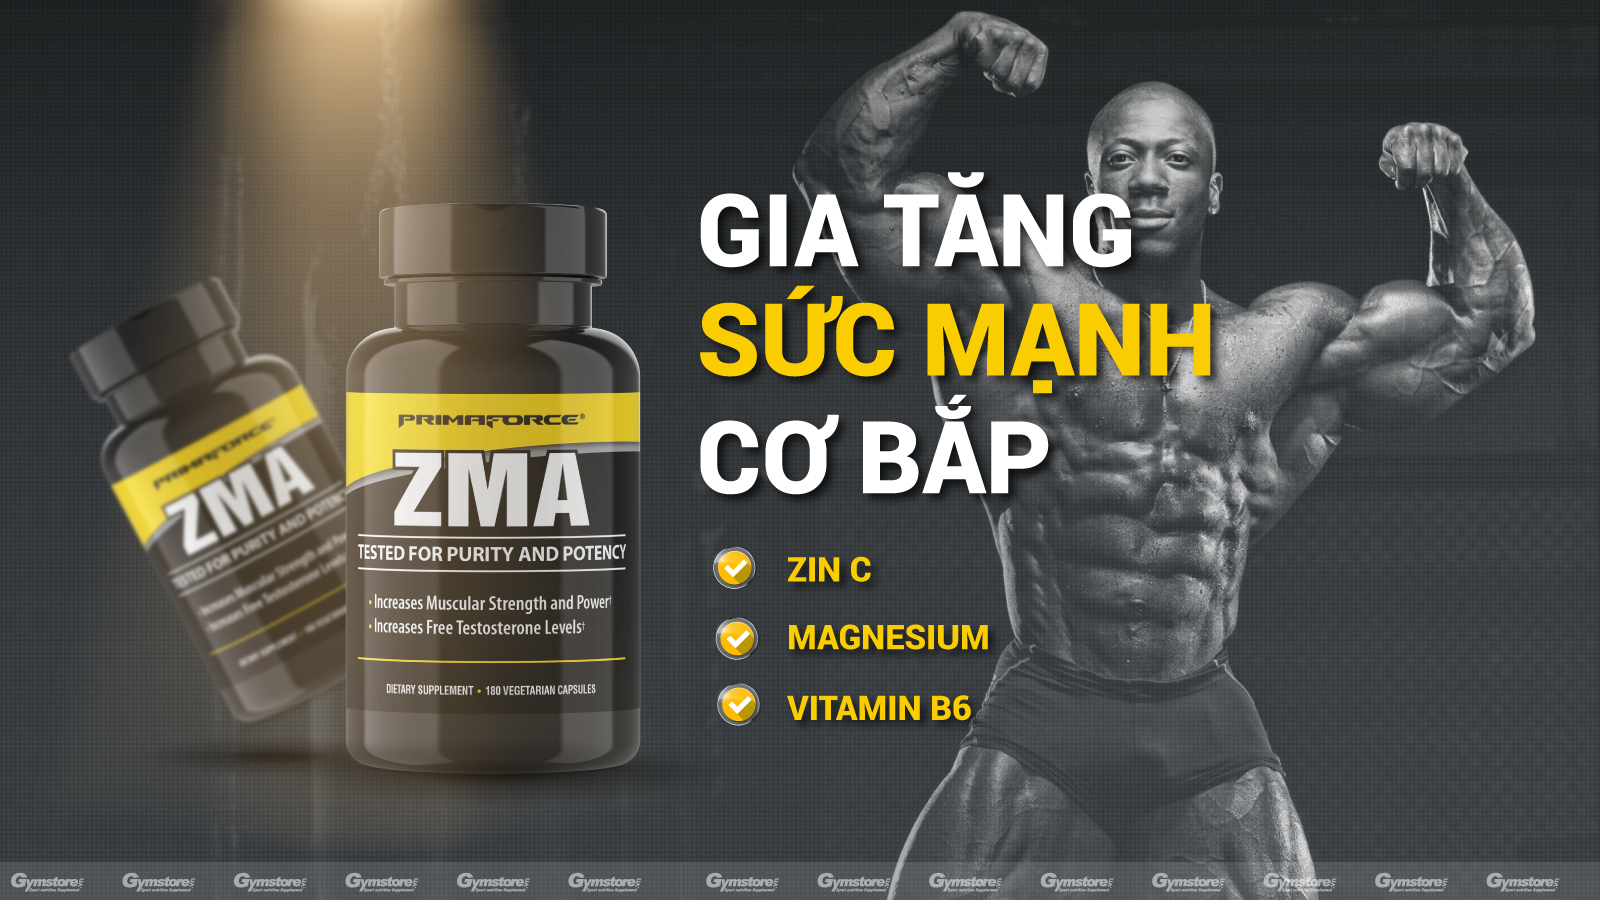 PRIMAFORCE-ZMA-tang-cuong-suc-khoe-toan-dien-gymstore